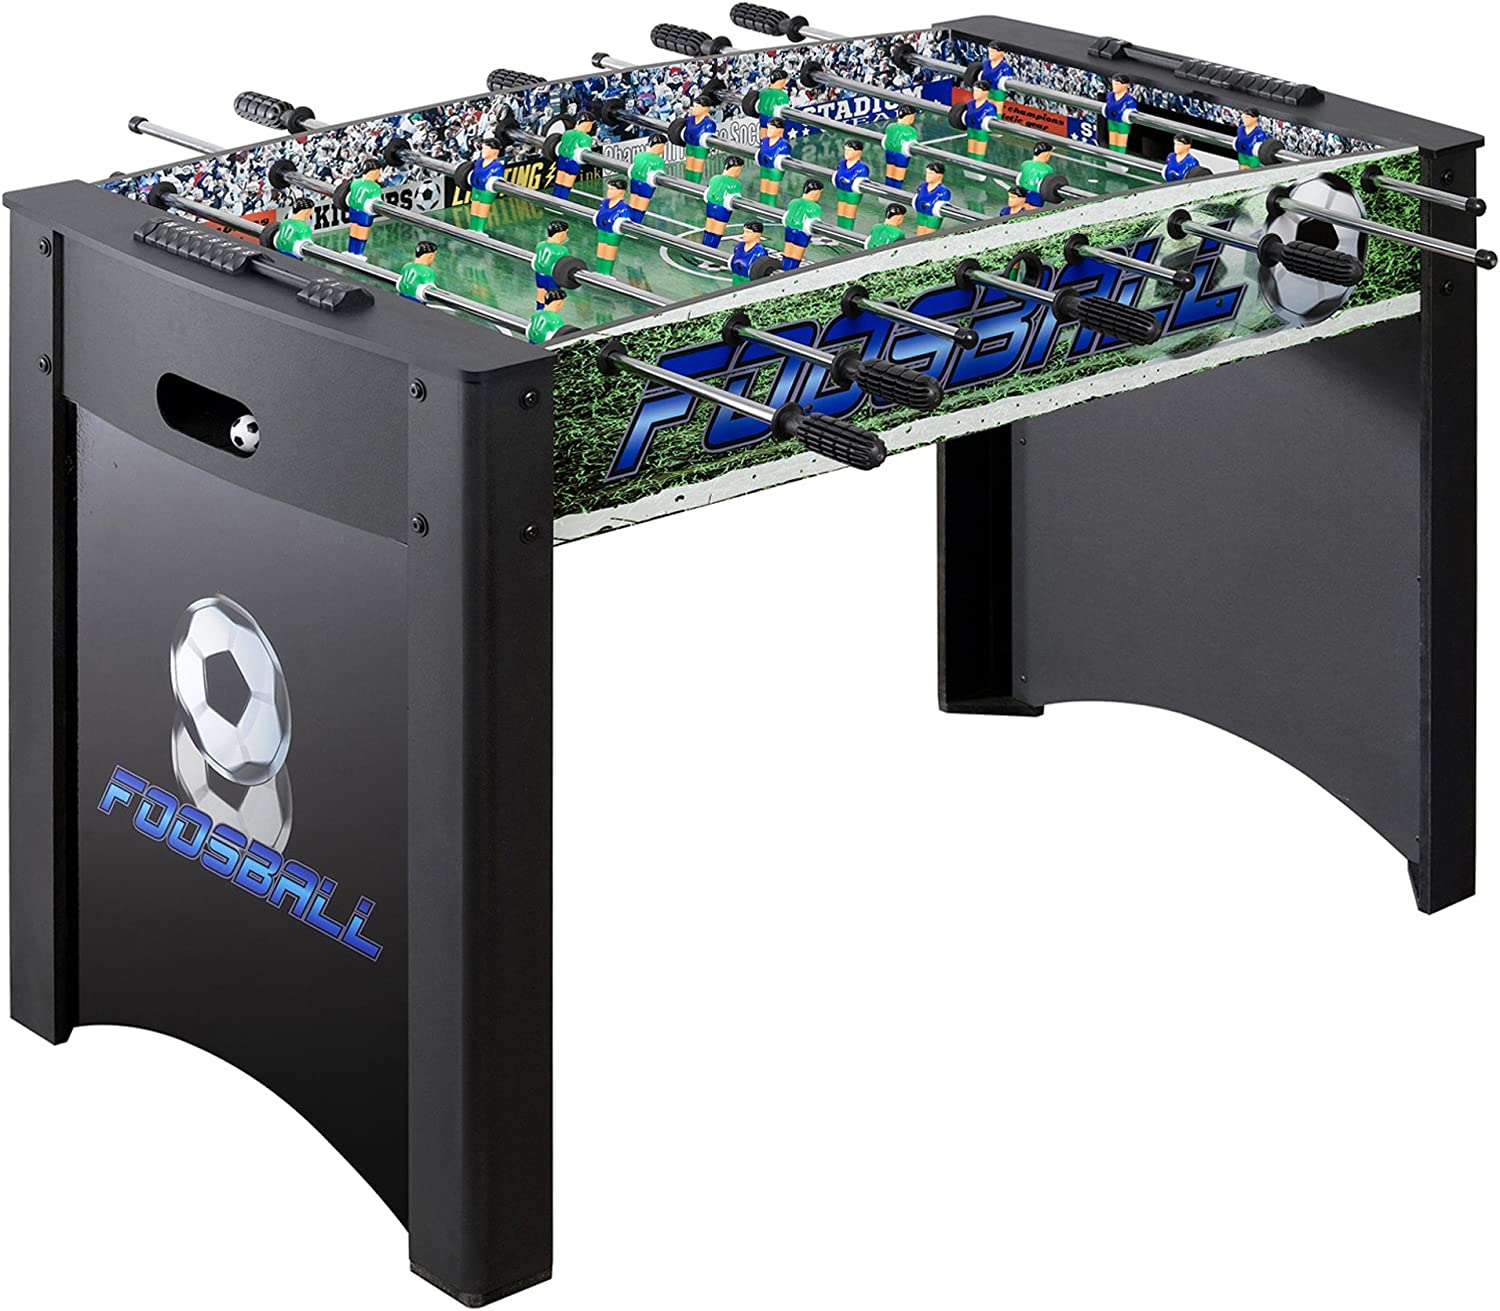 Hathaway Playoff 4’ Foosball Table, Soccer Game for Kids and Adults with Ergonomic Handles, Analog Scoring and Leg Levelers, Black/Green, 4-Feet